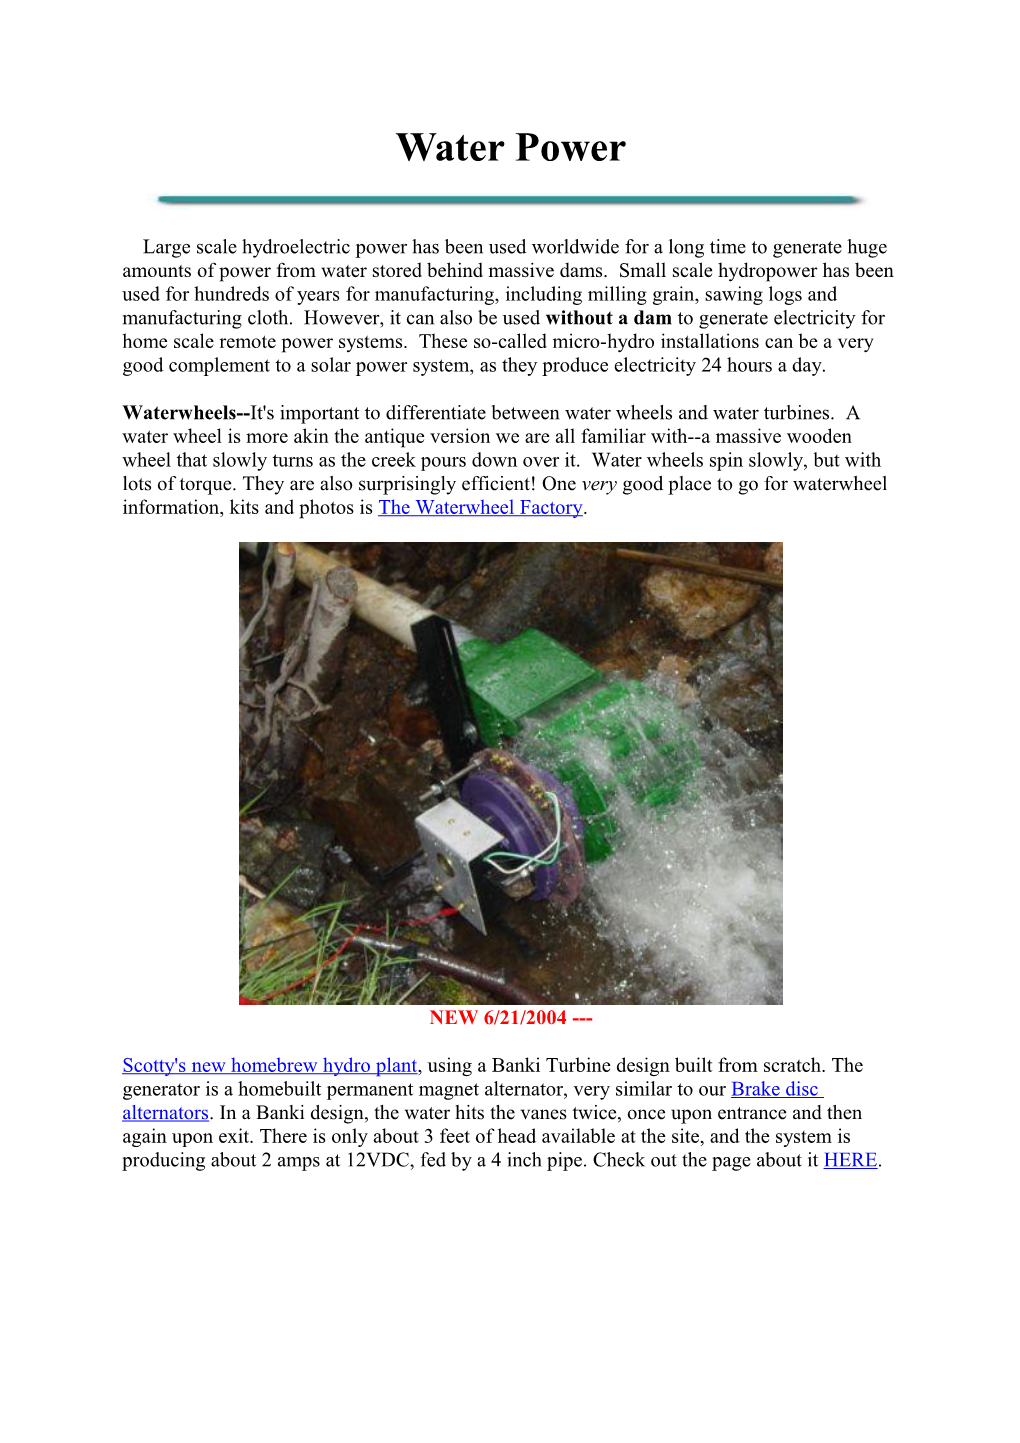 Some General Micro Hydro Power Information